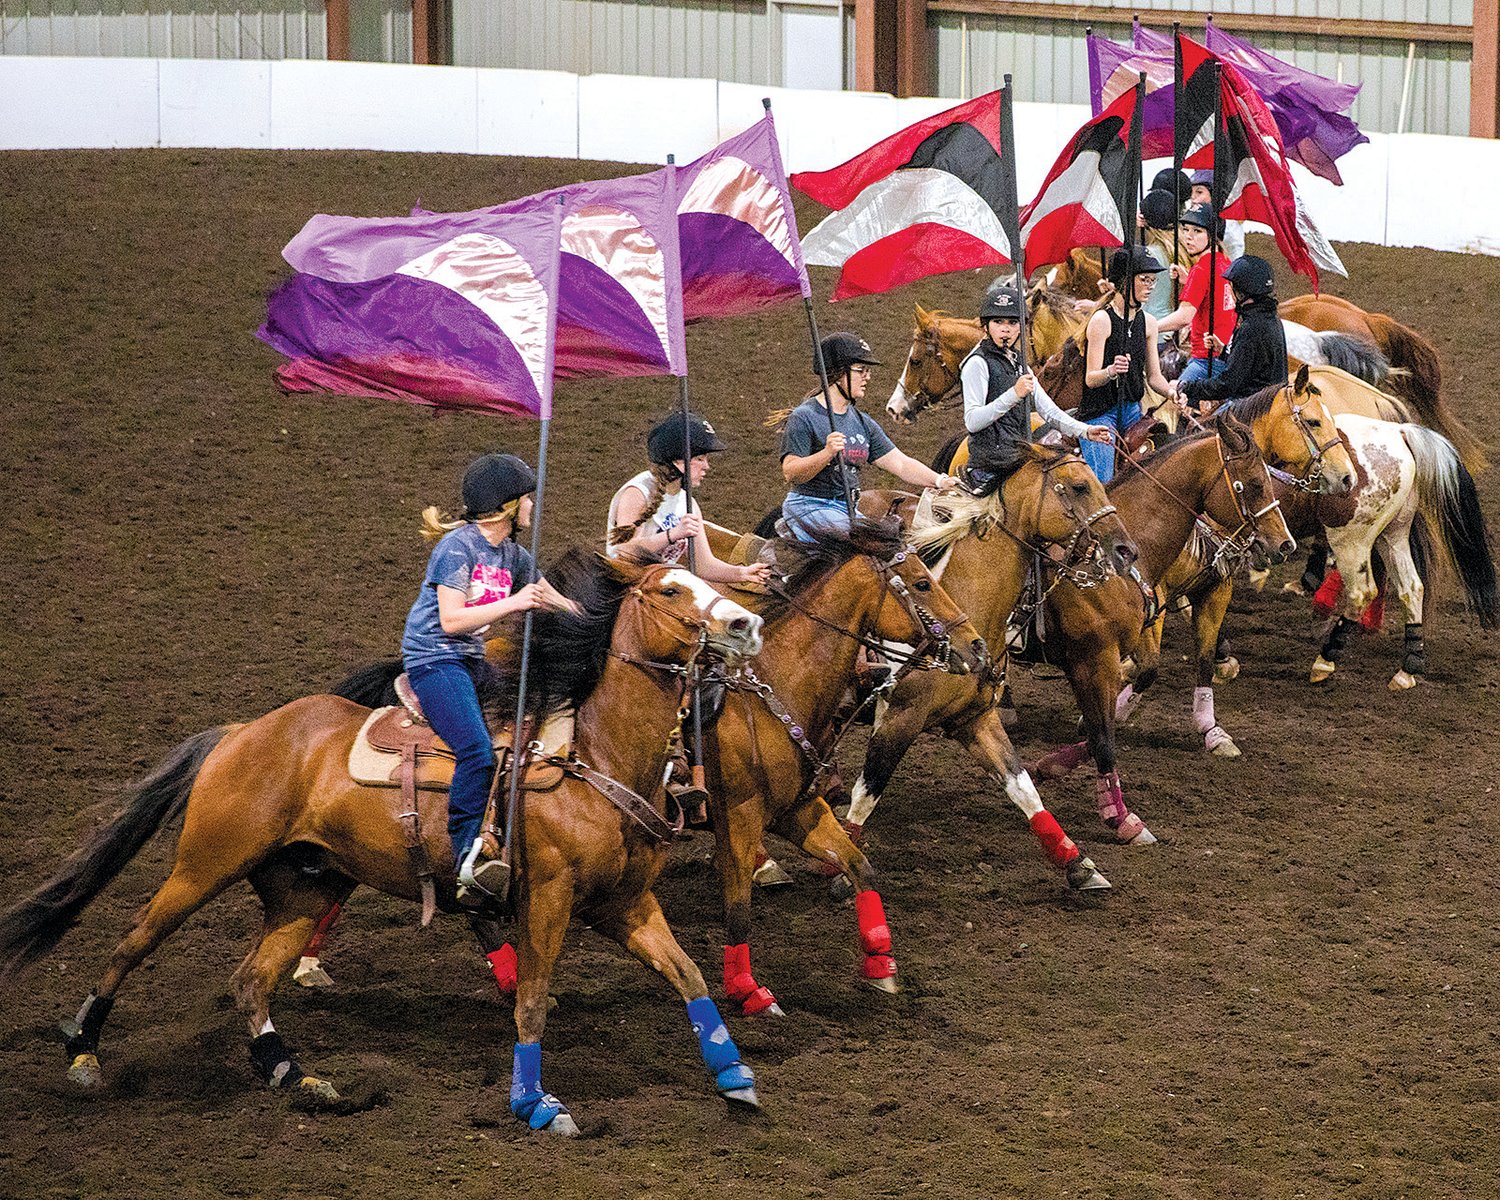 The W.F. West equestrian drill team runs through choreographed movements to music in Salkum’s Rocky Top Arena on Monday.